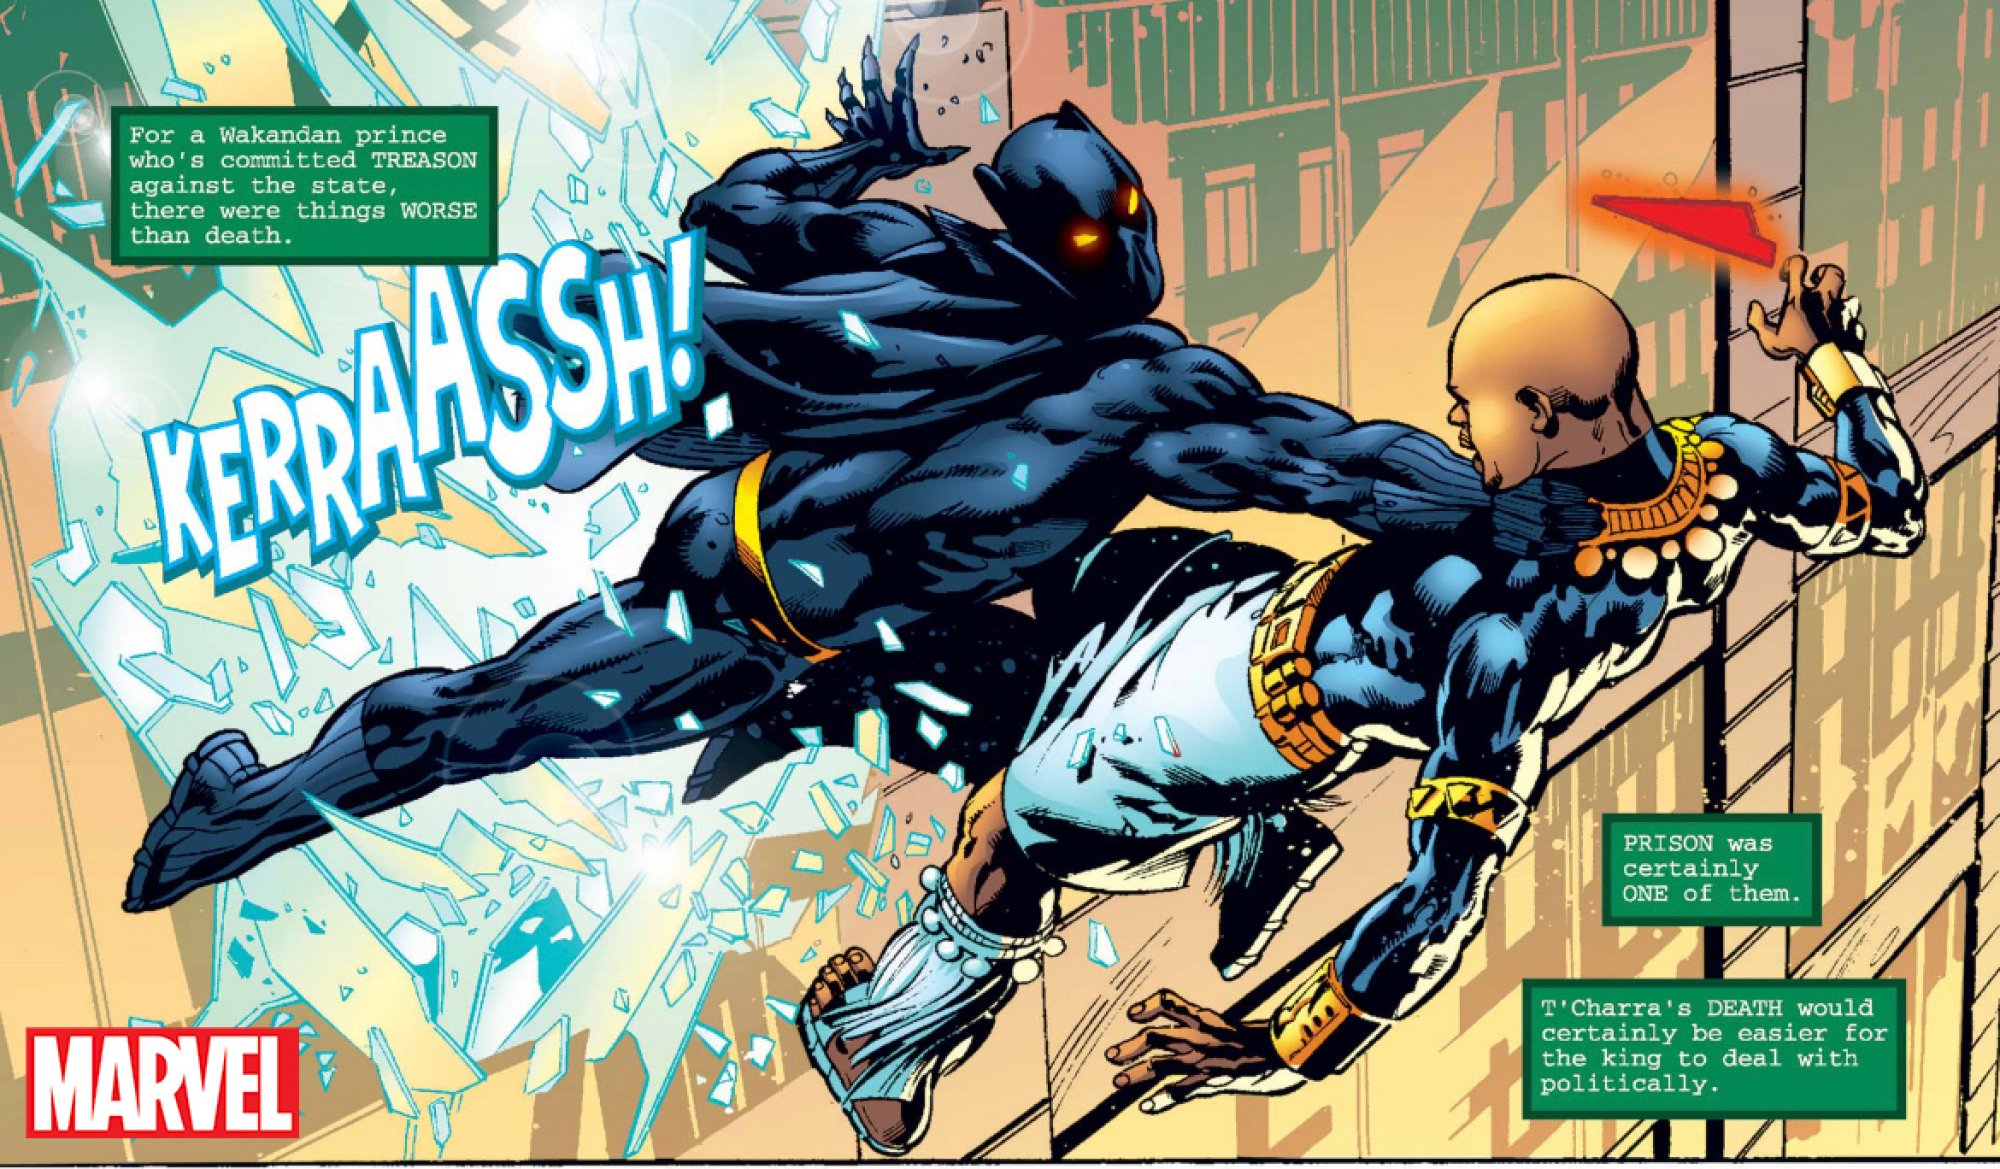 A Marvel comic panel showing T'Charra.